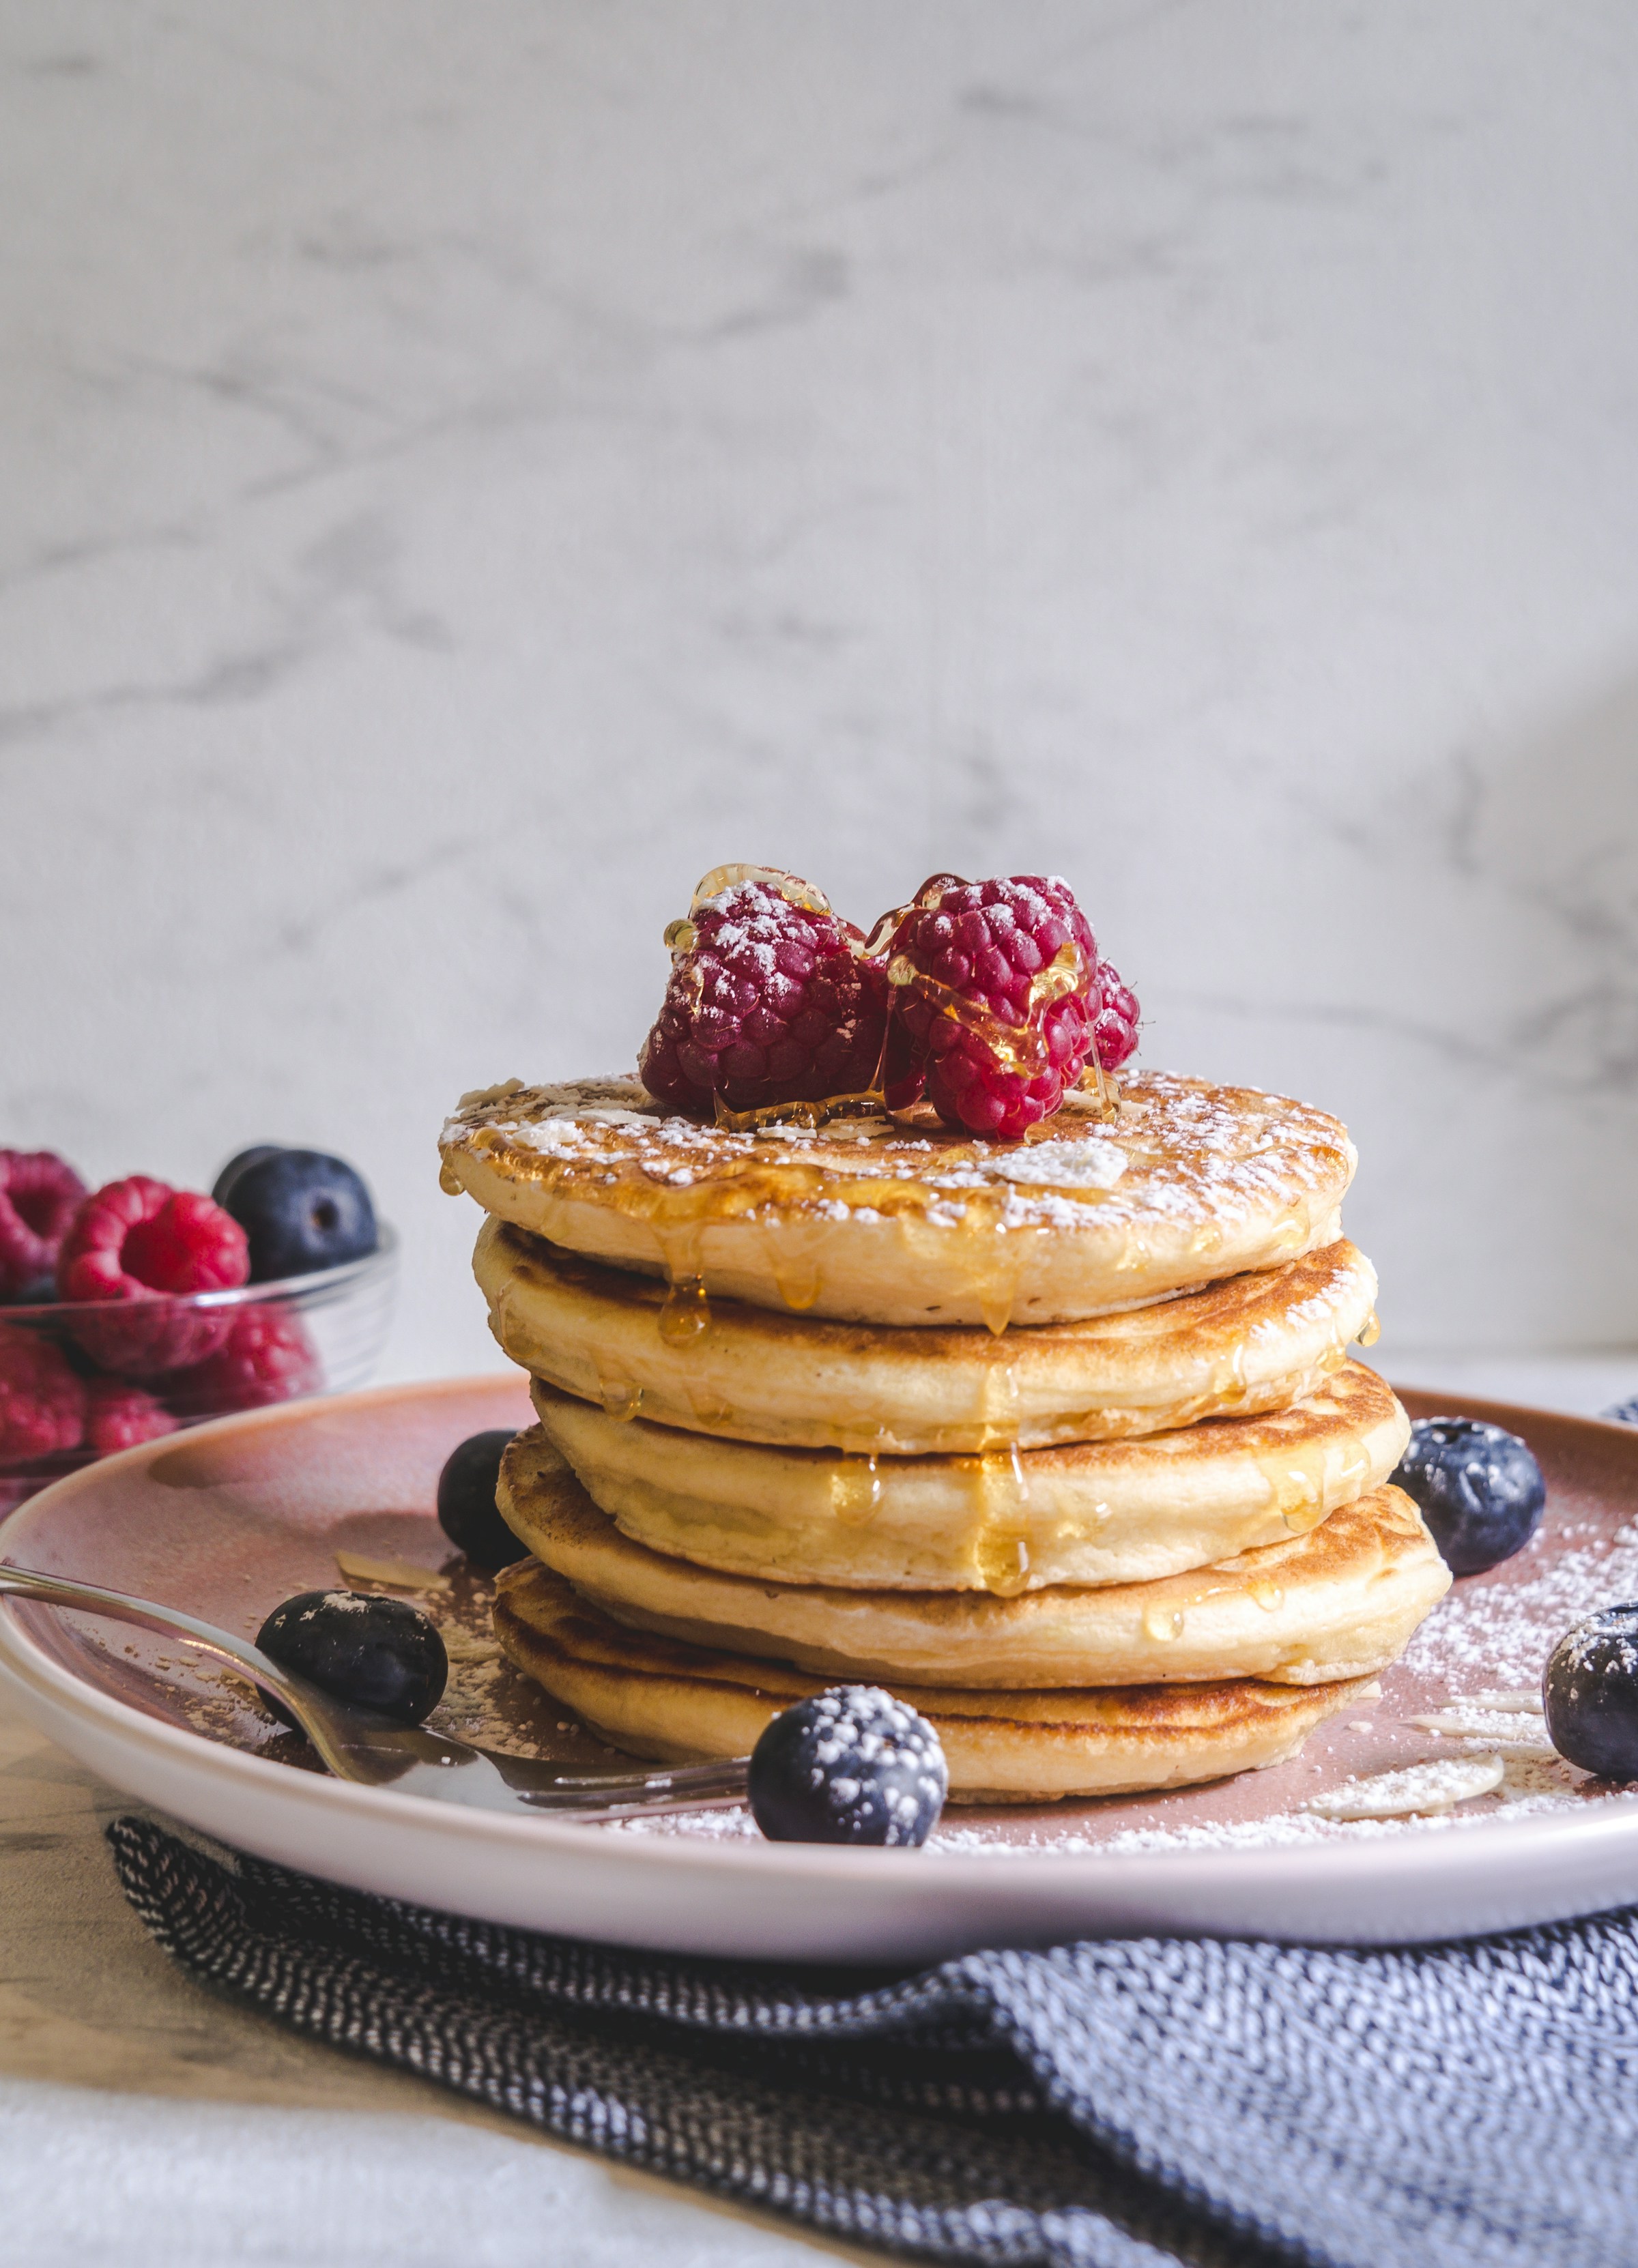 A stack of pancakes | Source: Unsplash